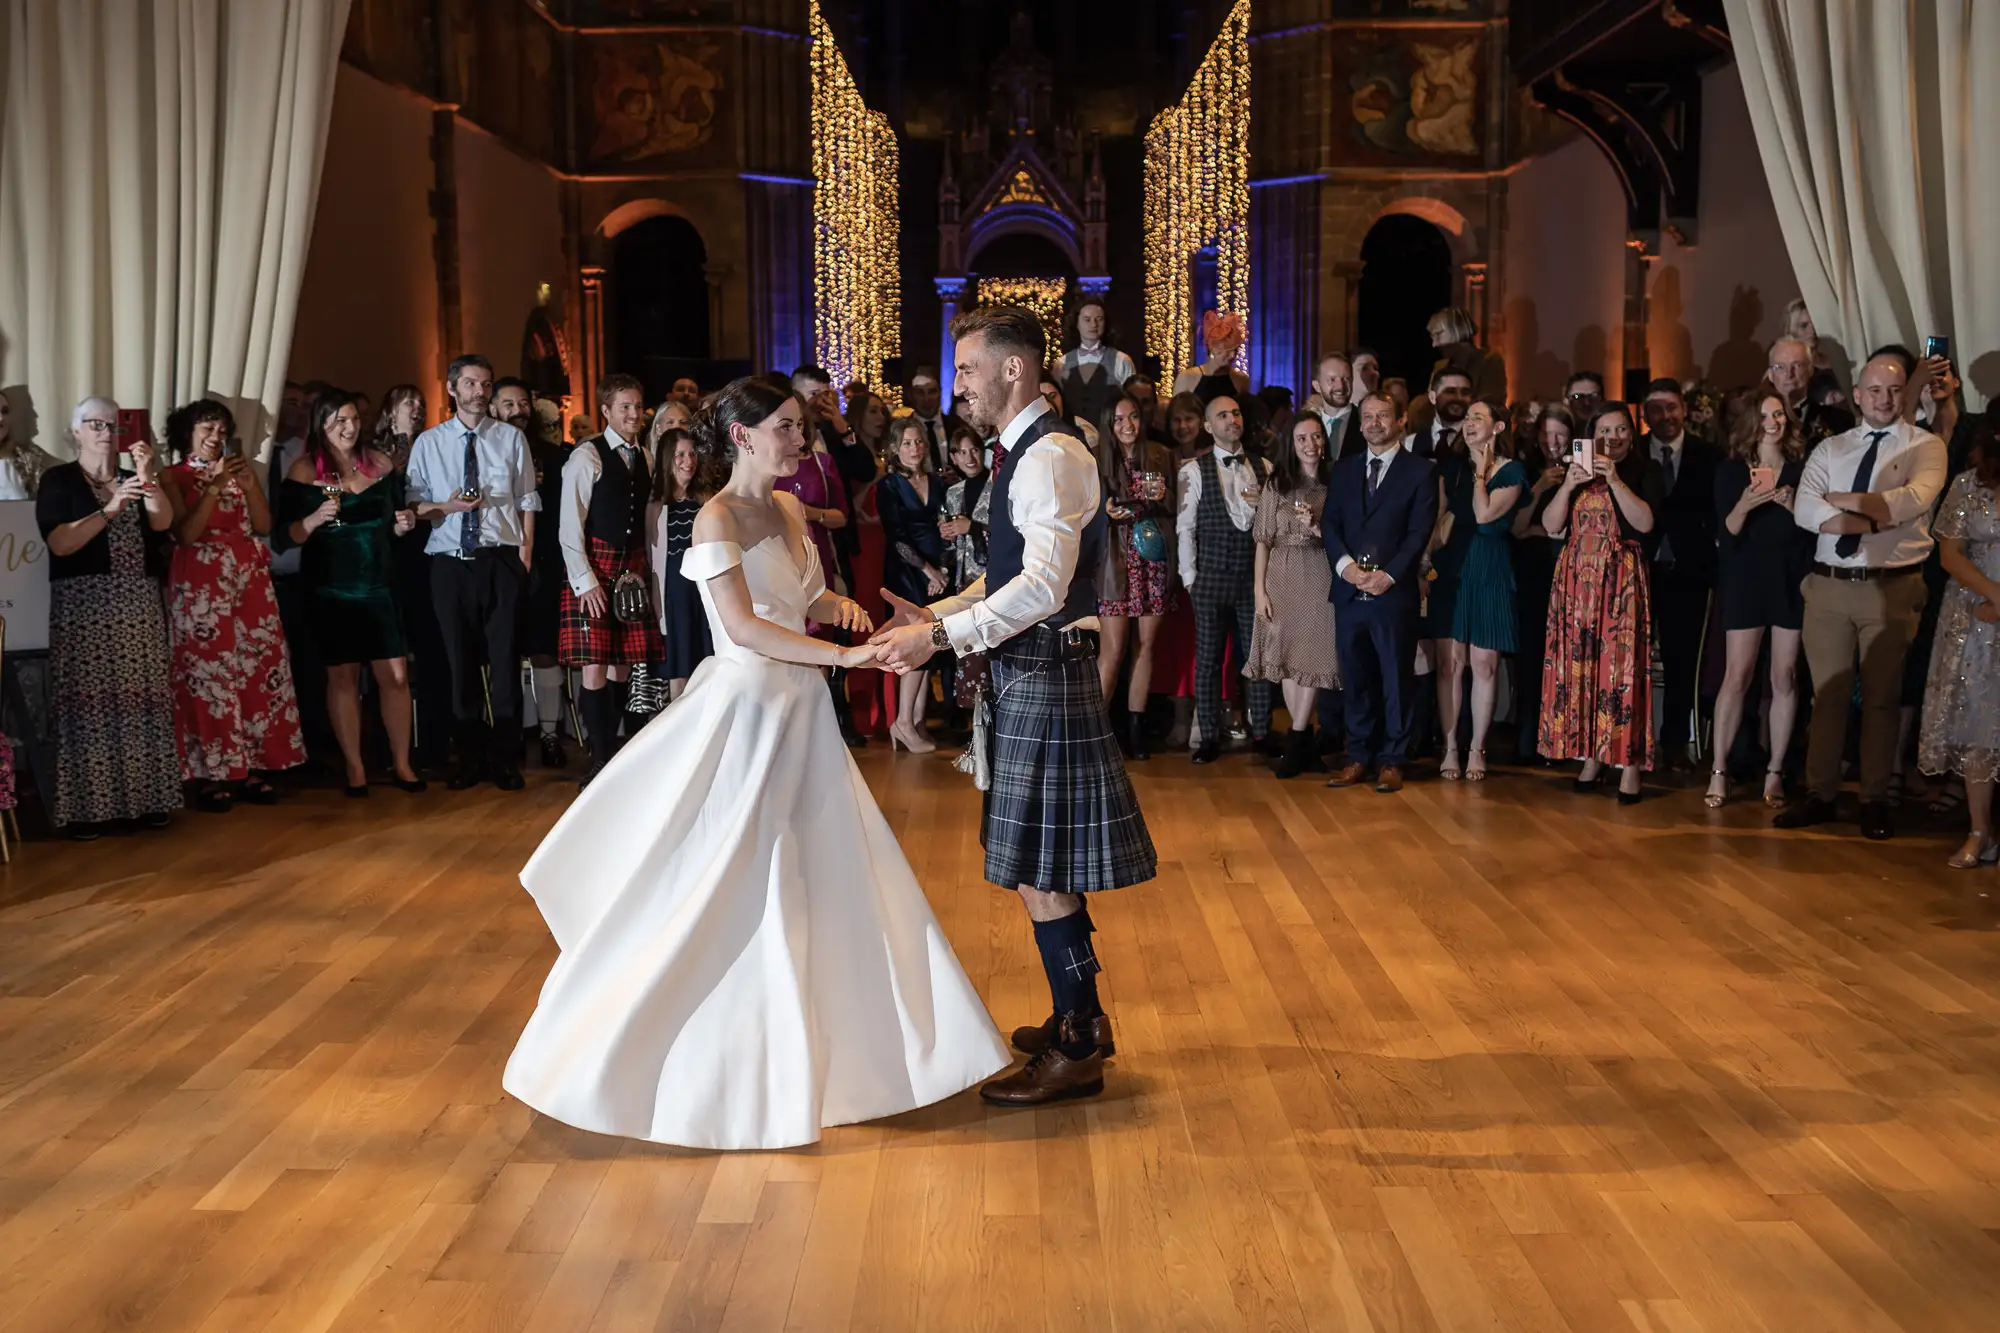 A bride in a white dress and a groom in a kilt dance in the center of a ballroom, surrounded by guests watching and clapping.